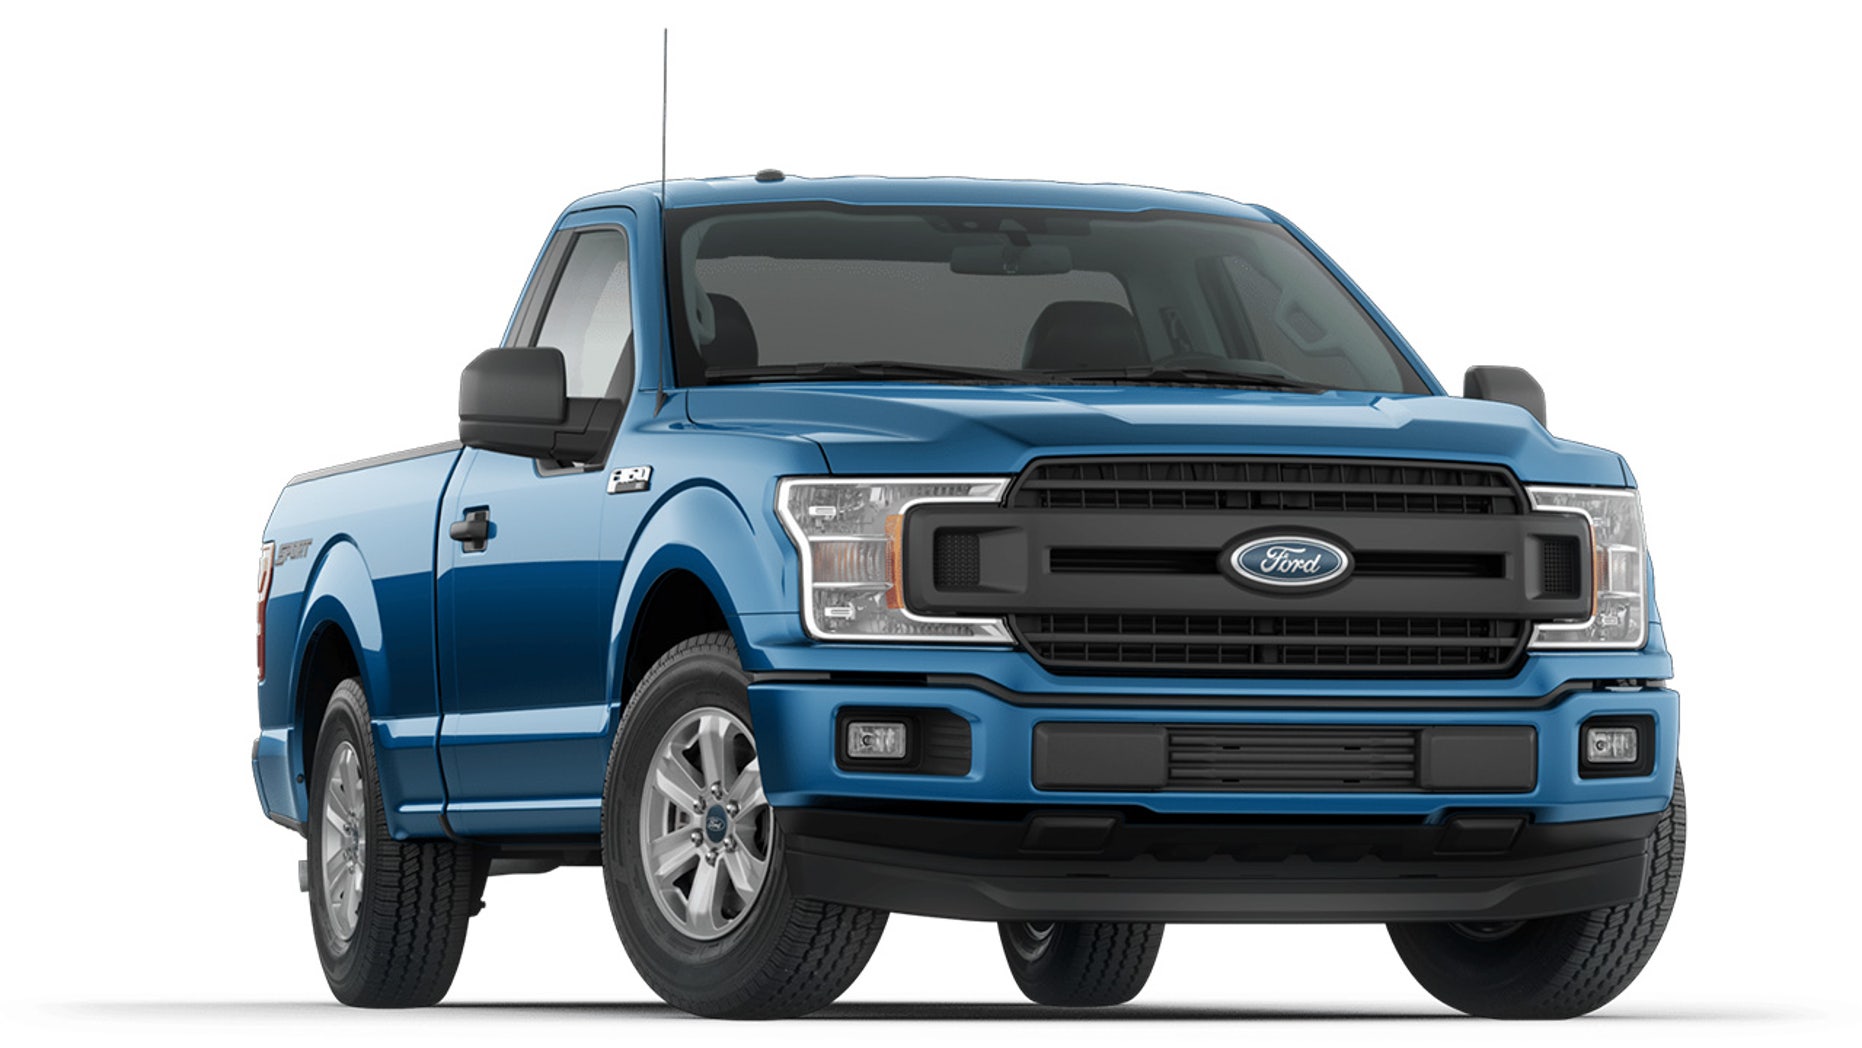 725 hp Ford F-150 on sale for under $40,000 | Fox News